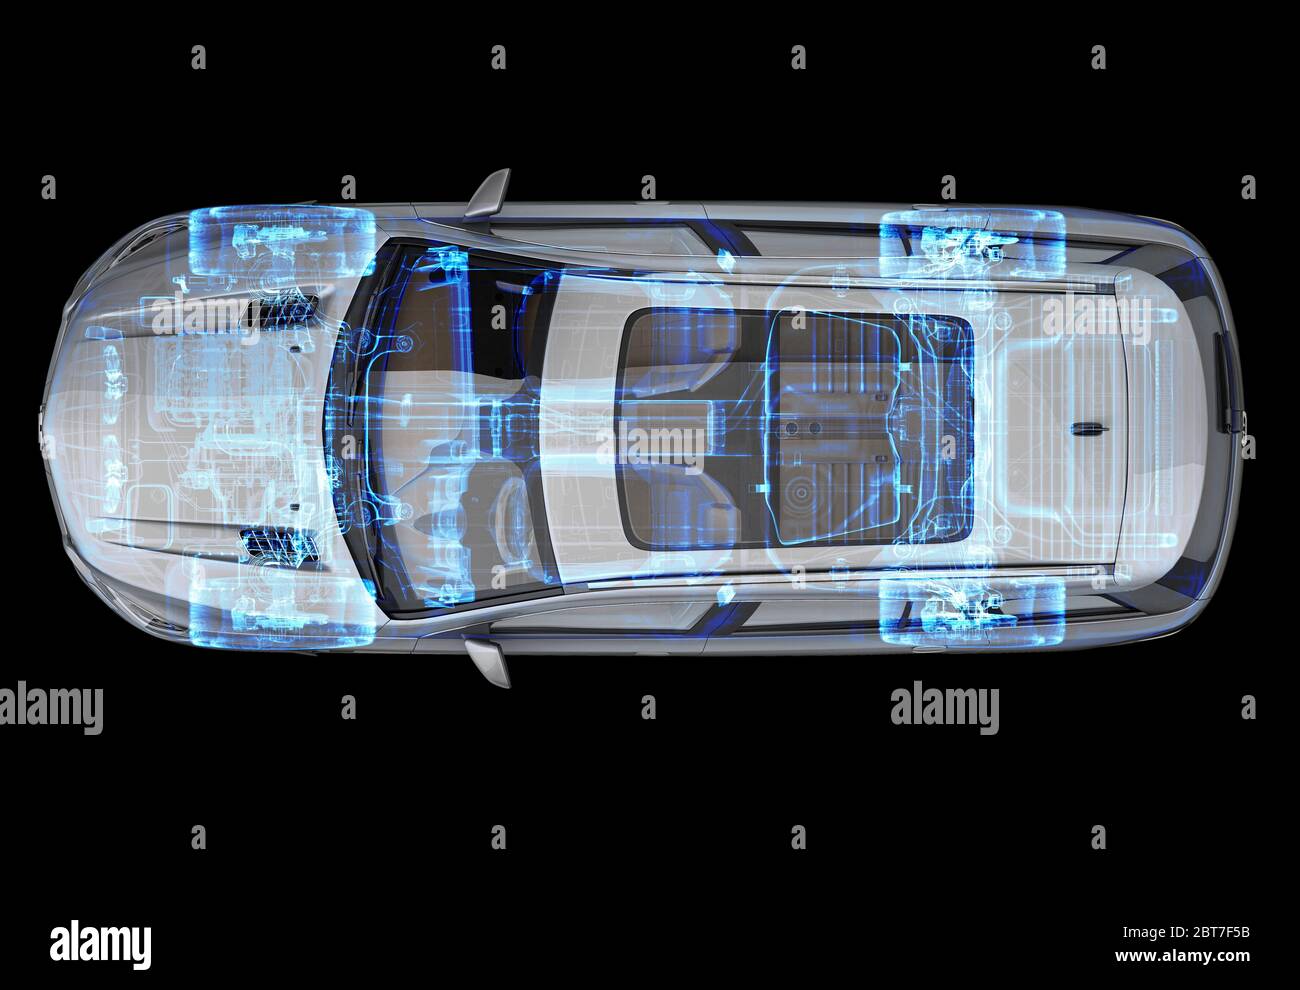 Technical 3d illustration of SUV car with x-ray effect. Top view on black background. Stock Photo